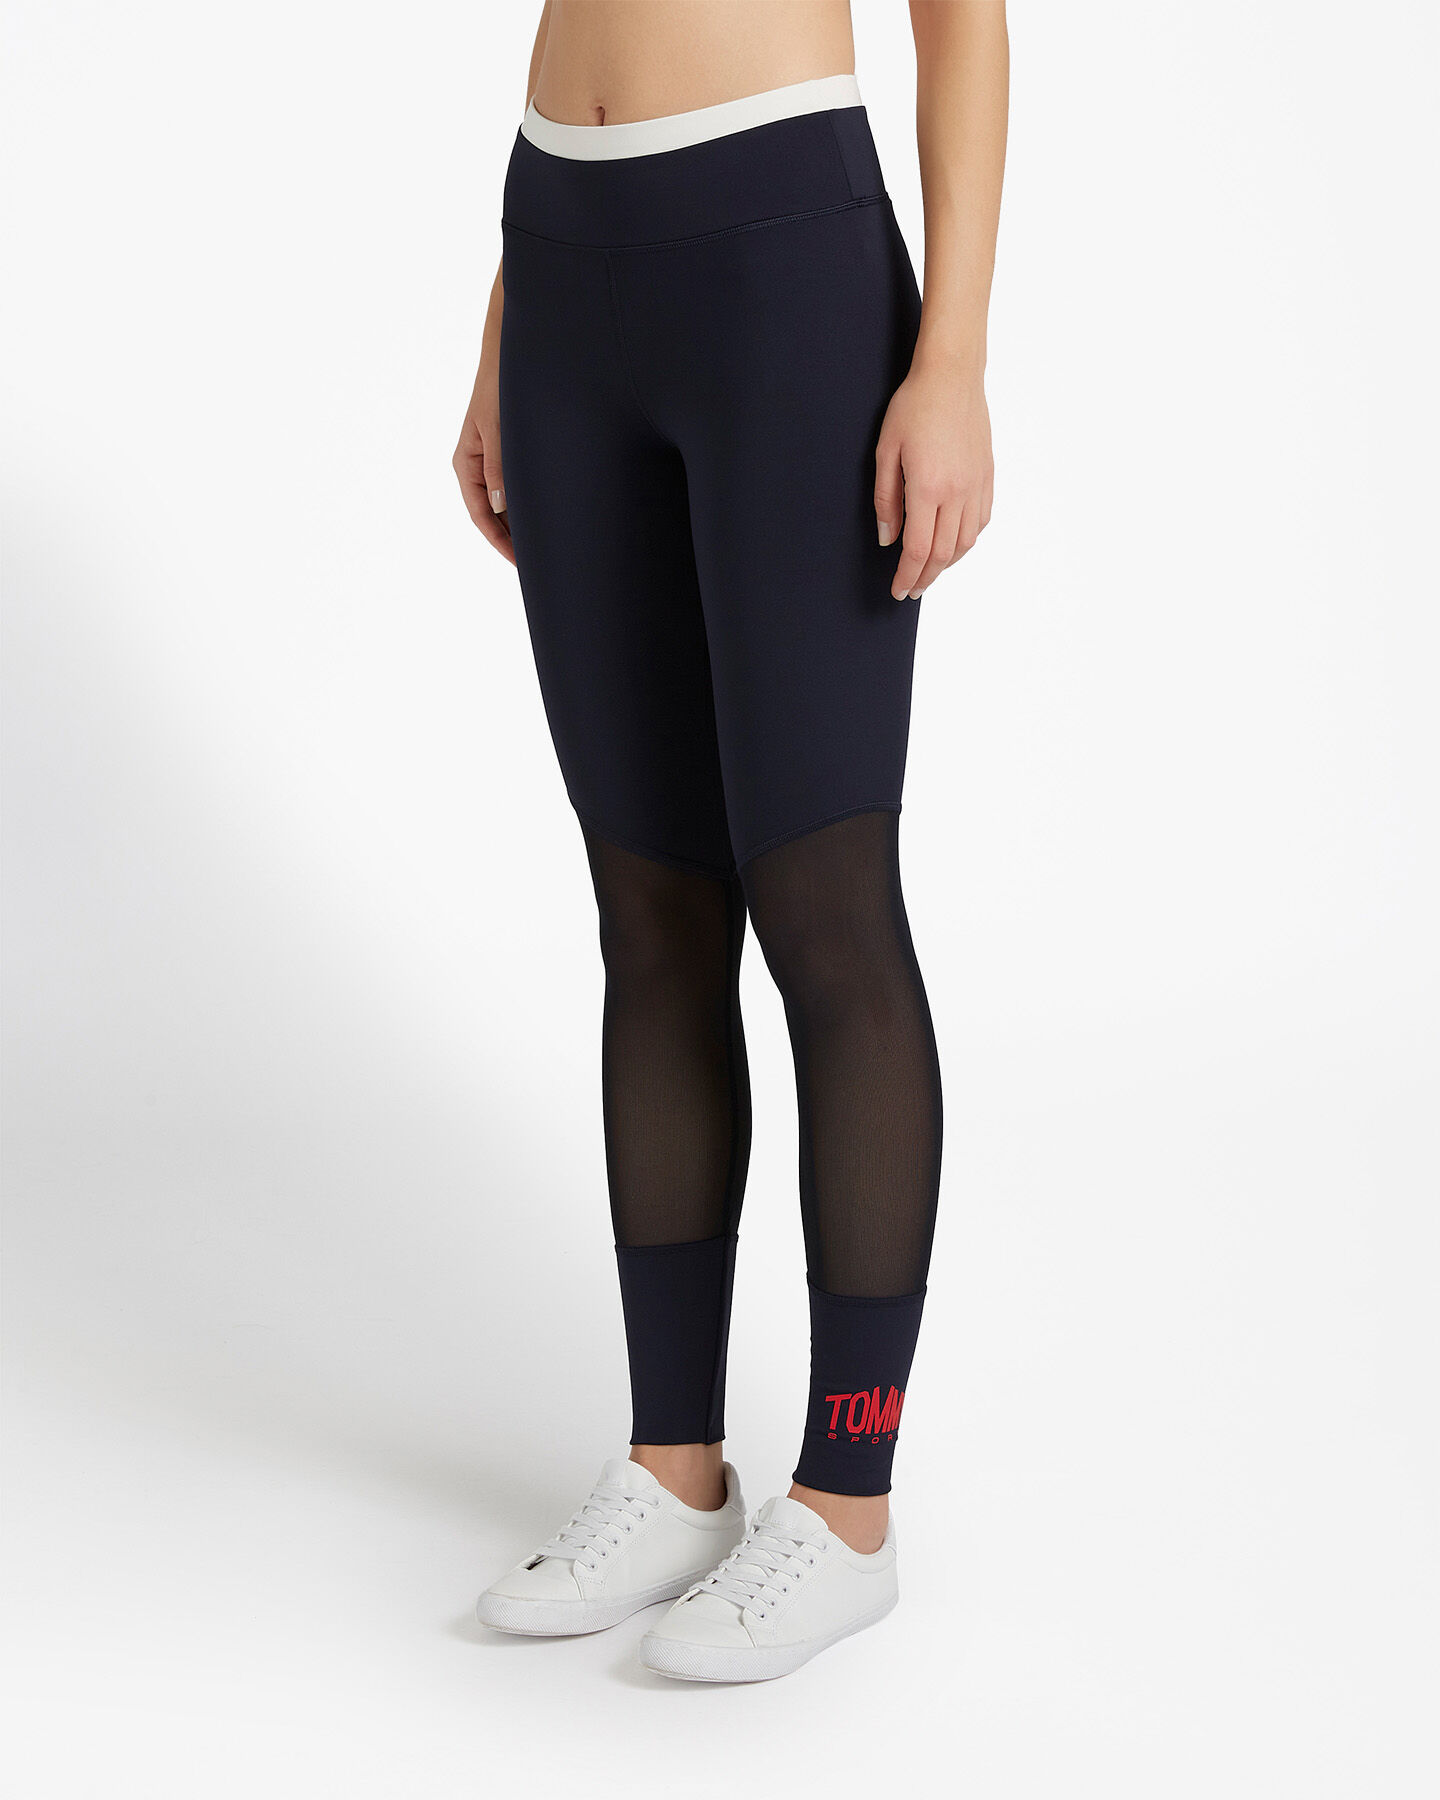  Leggings TOMMY HILFIGER INSERT MESH W S4082522|DW5|XS scatto 2